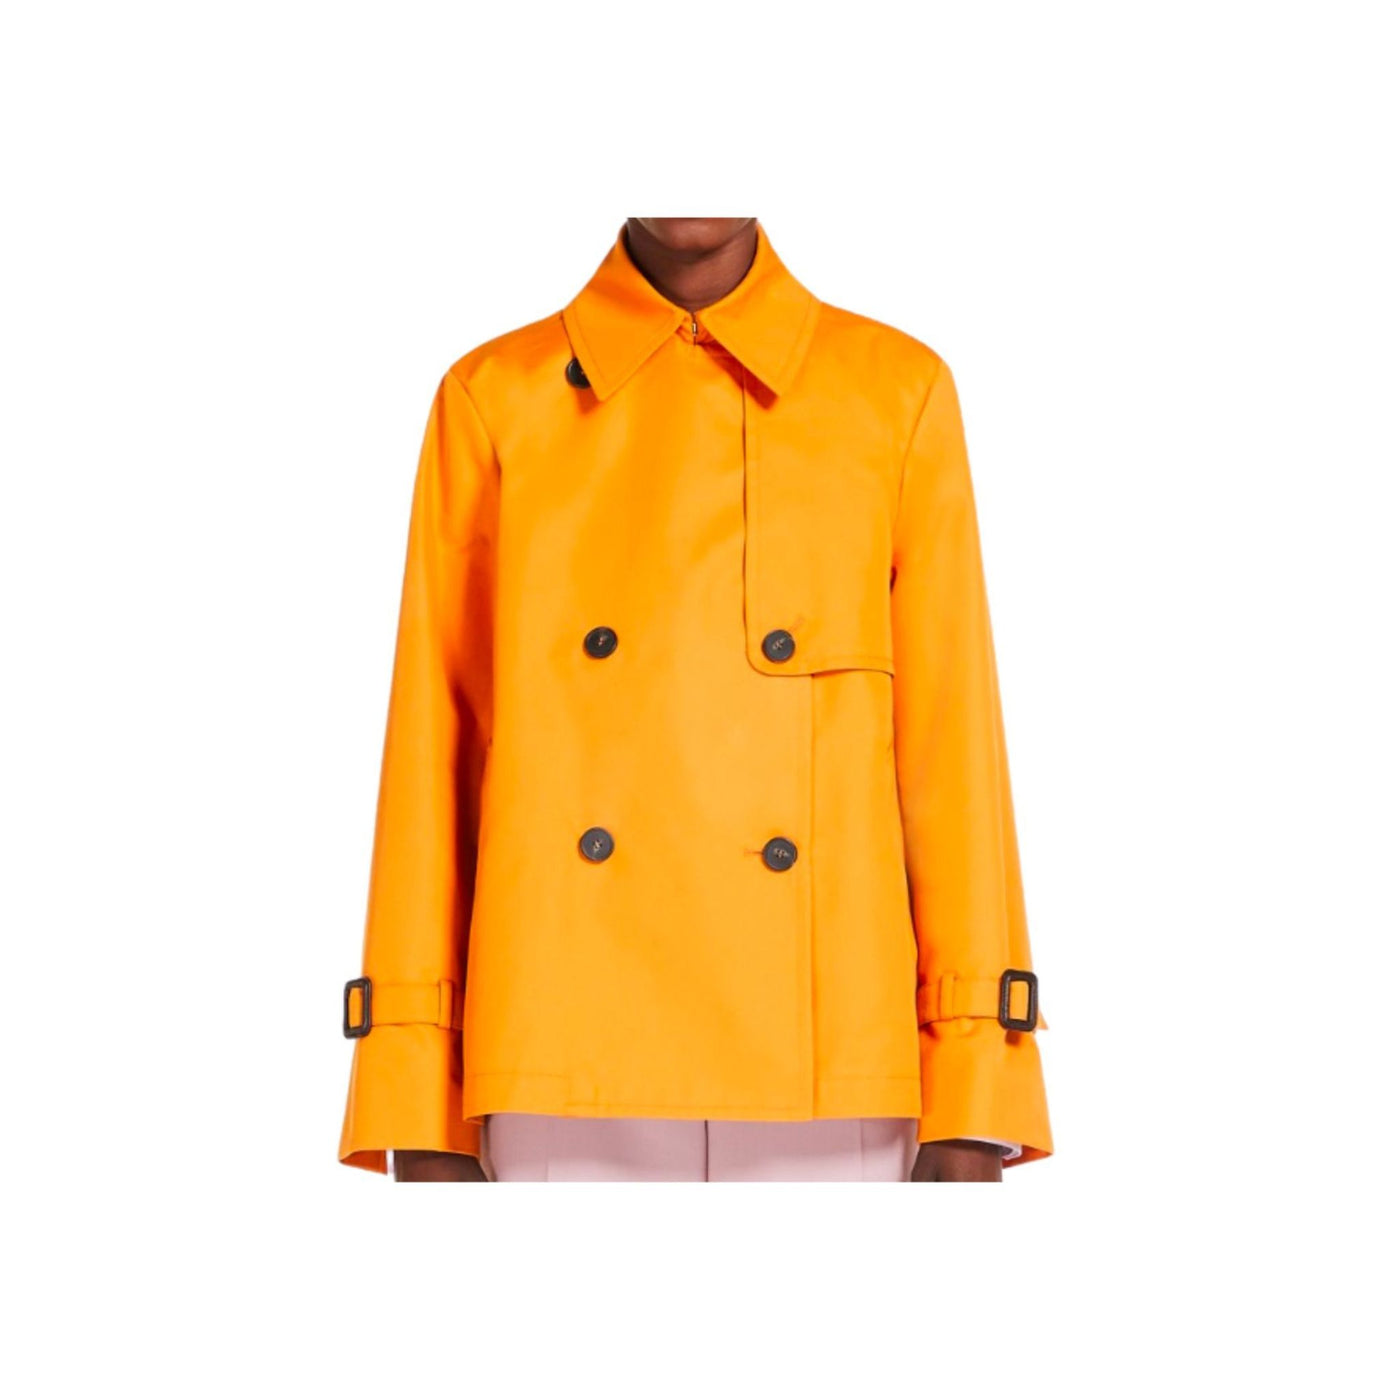 Women's raincoat with elegant double-breasted